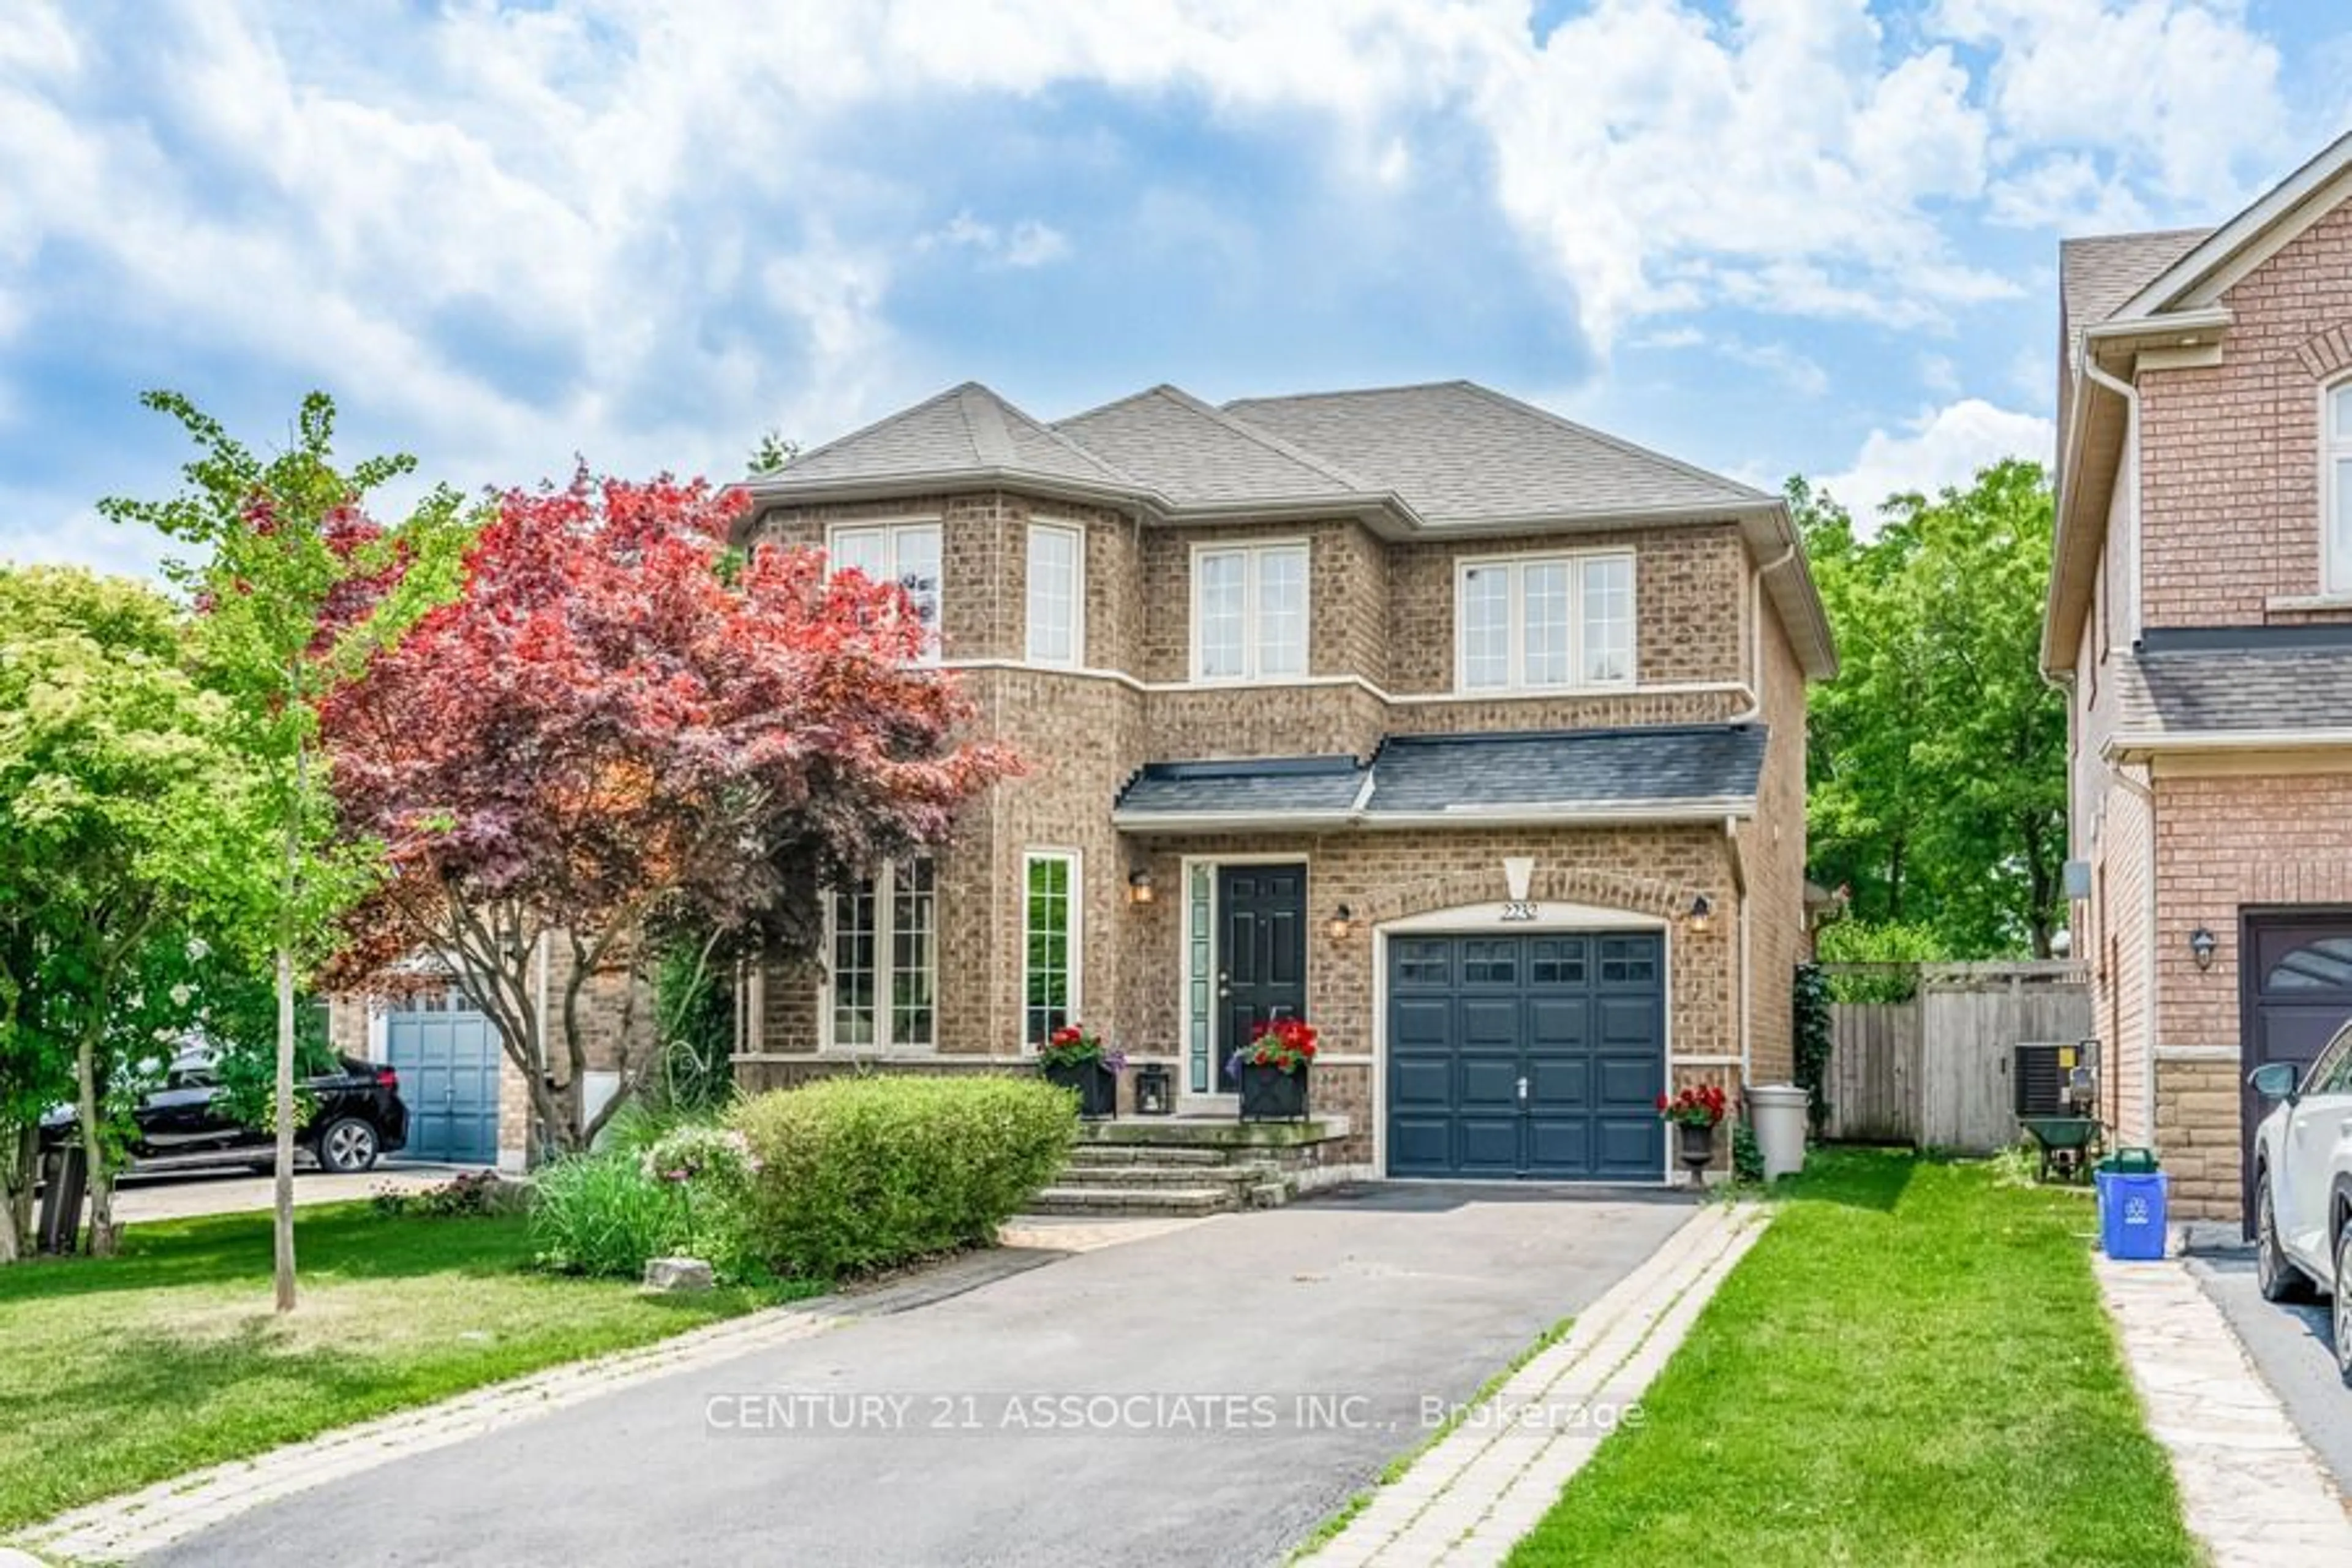 Home with brick exterior material for 2232 Stillmeadow Rd, Oakville Ontario L6M 3T9